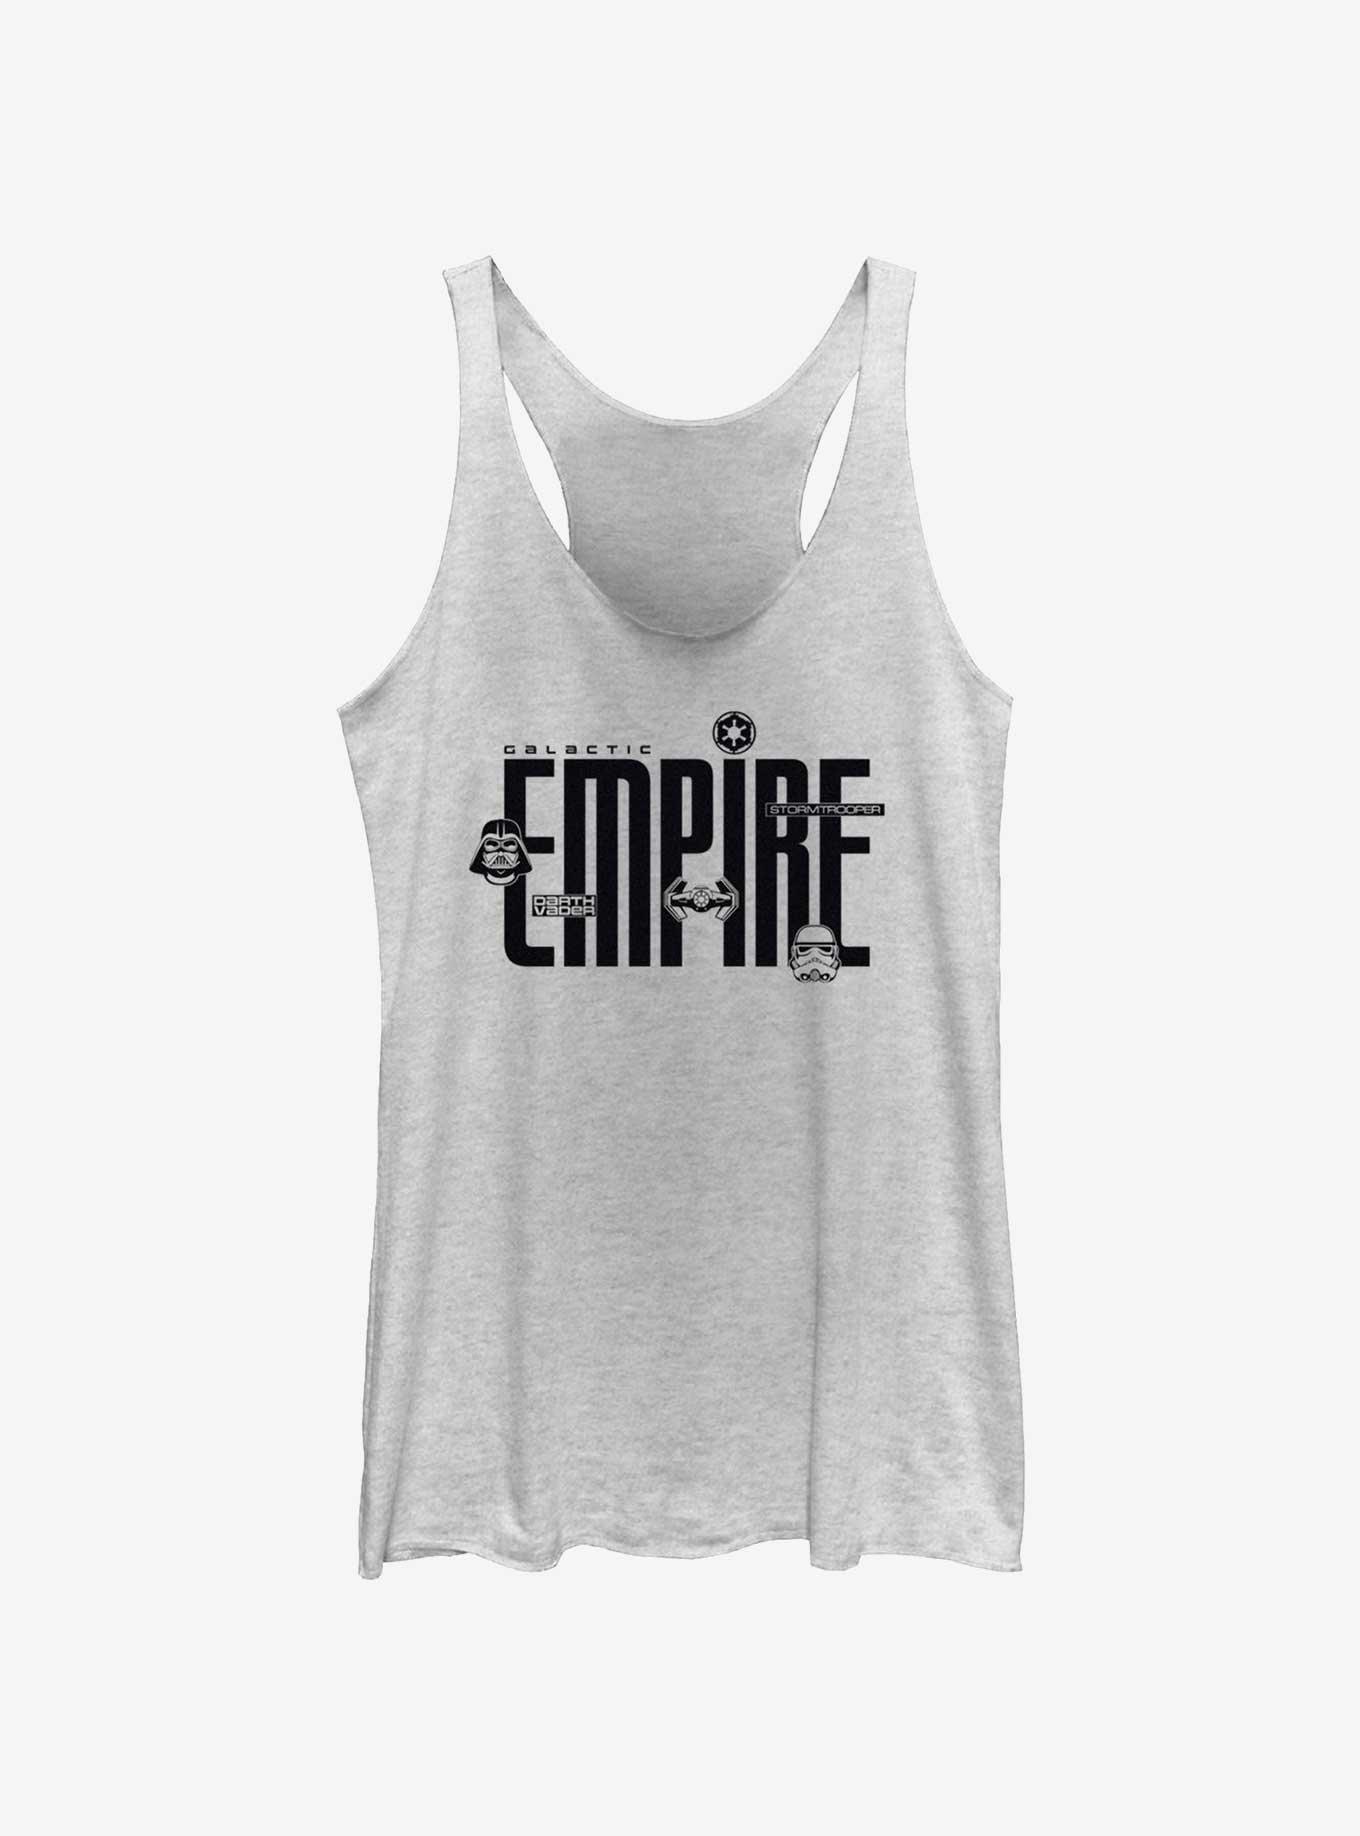 Star Wars Year of the Dark Side Galactic Empire Girls Tank, WHITE HTR, hi-res